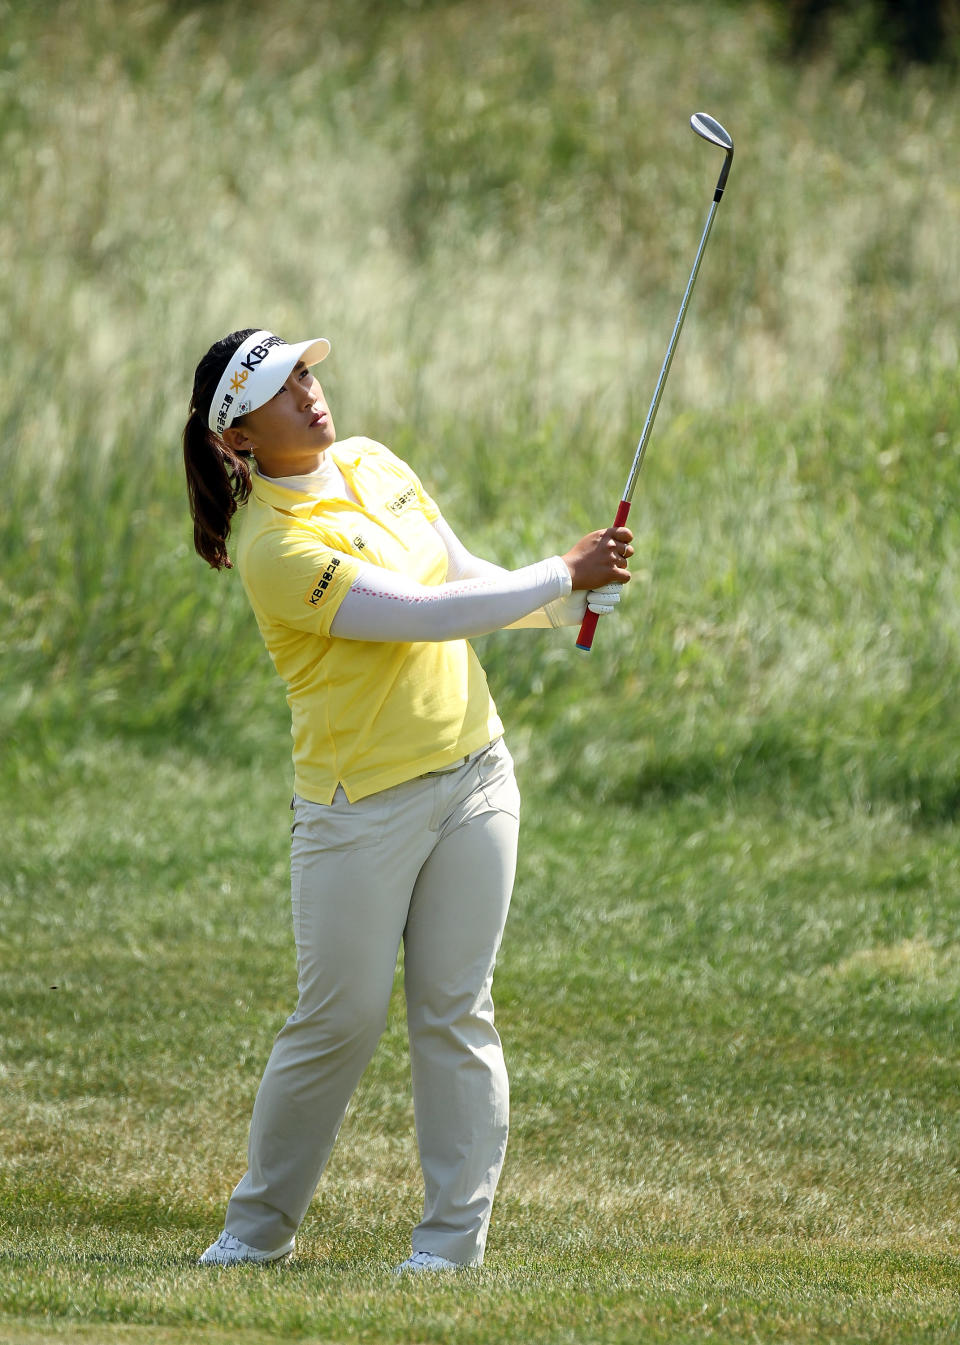 KOHLER, WI - JULY 08: Amy Yang of South Korea hits her third shot on the par 5 10th hole during the final round the 2012 U.S. Women's Open at Blackwolf Run on July 8, 2012 in Kohler, Wisconsin. (Photo by Andy Lyons/Getty Images)